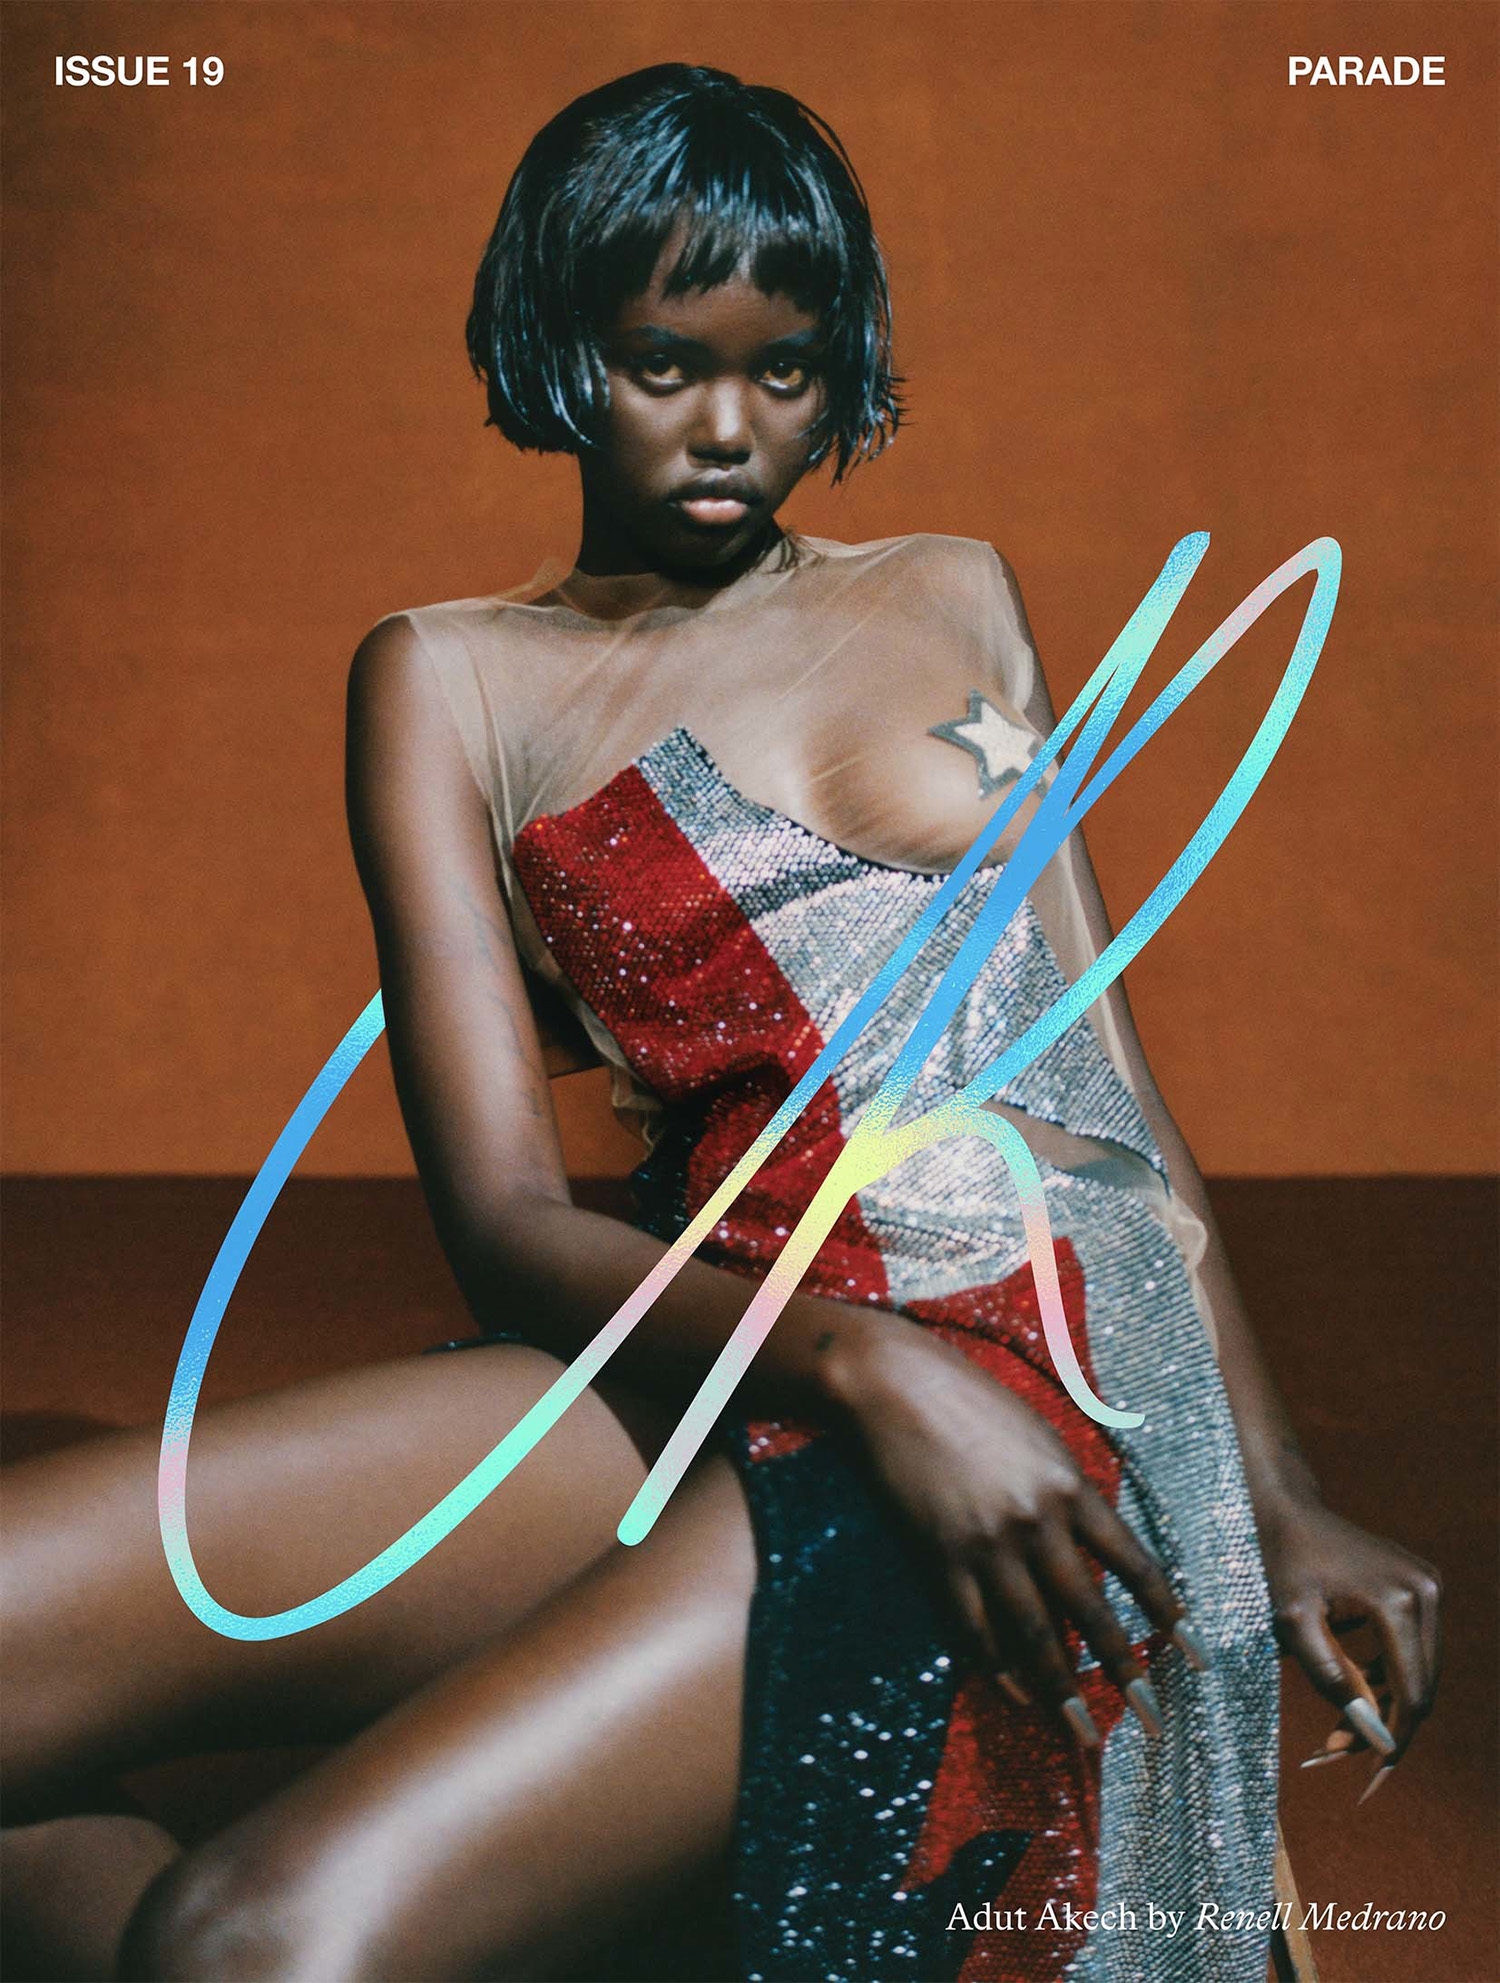 Adut Akech covers CR Fashion Book Issue 19 by Renell Medrano